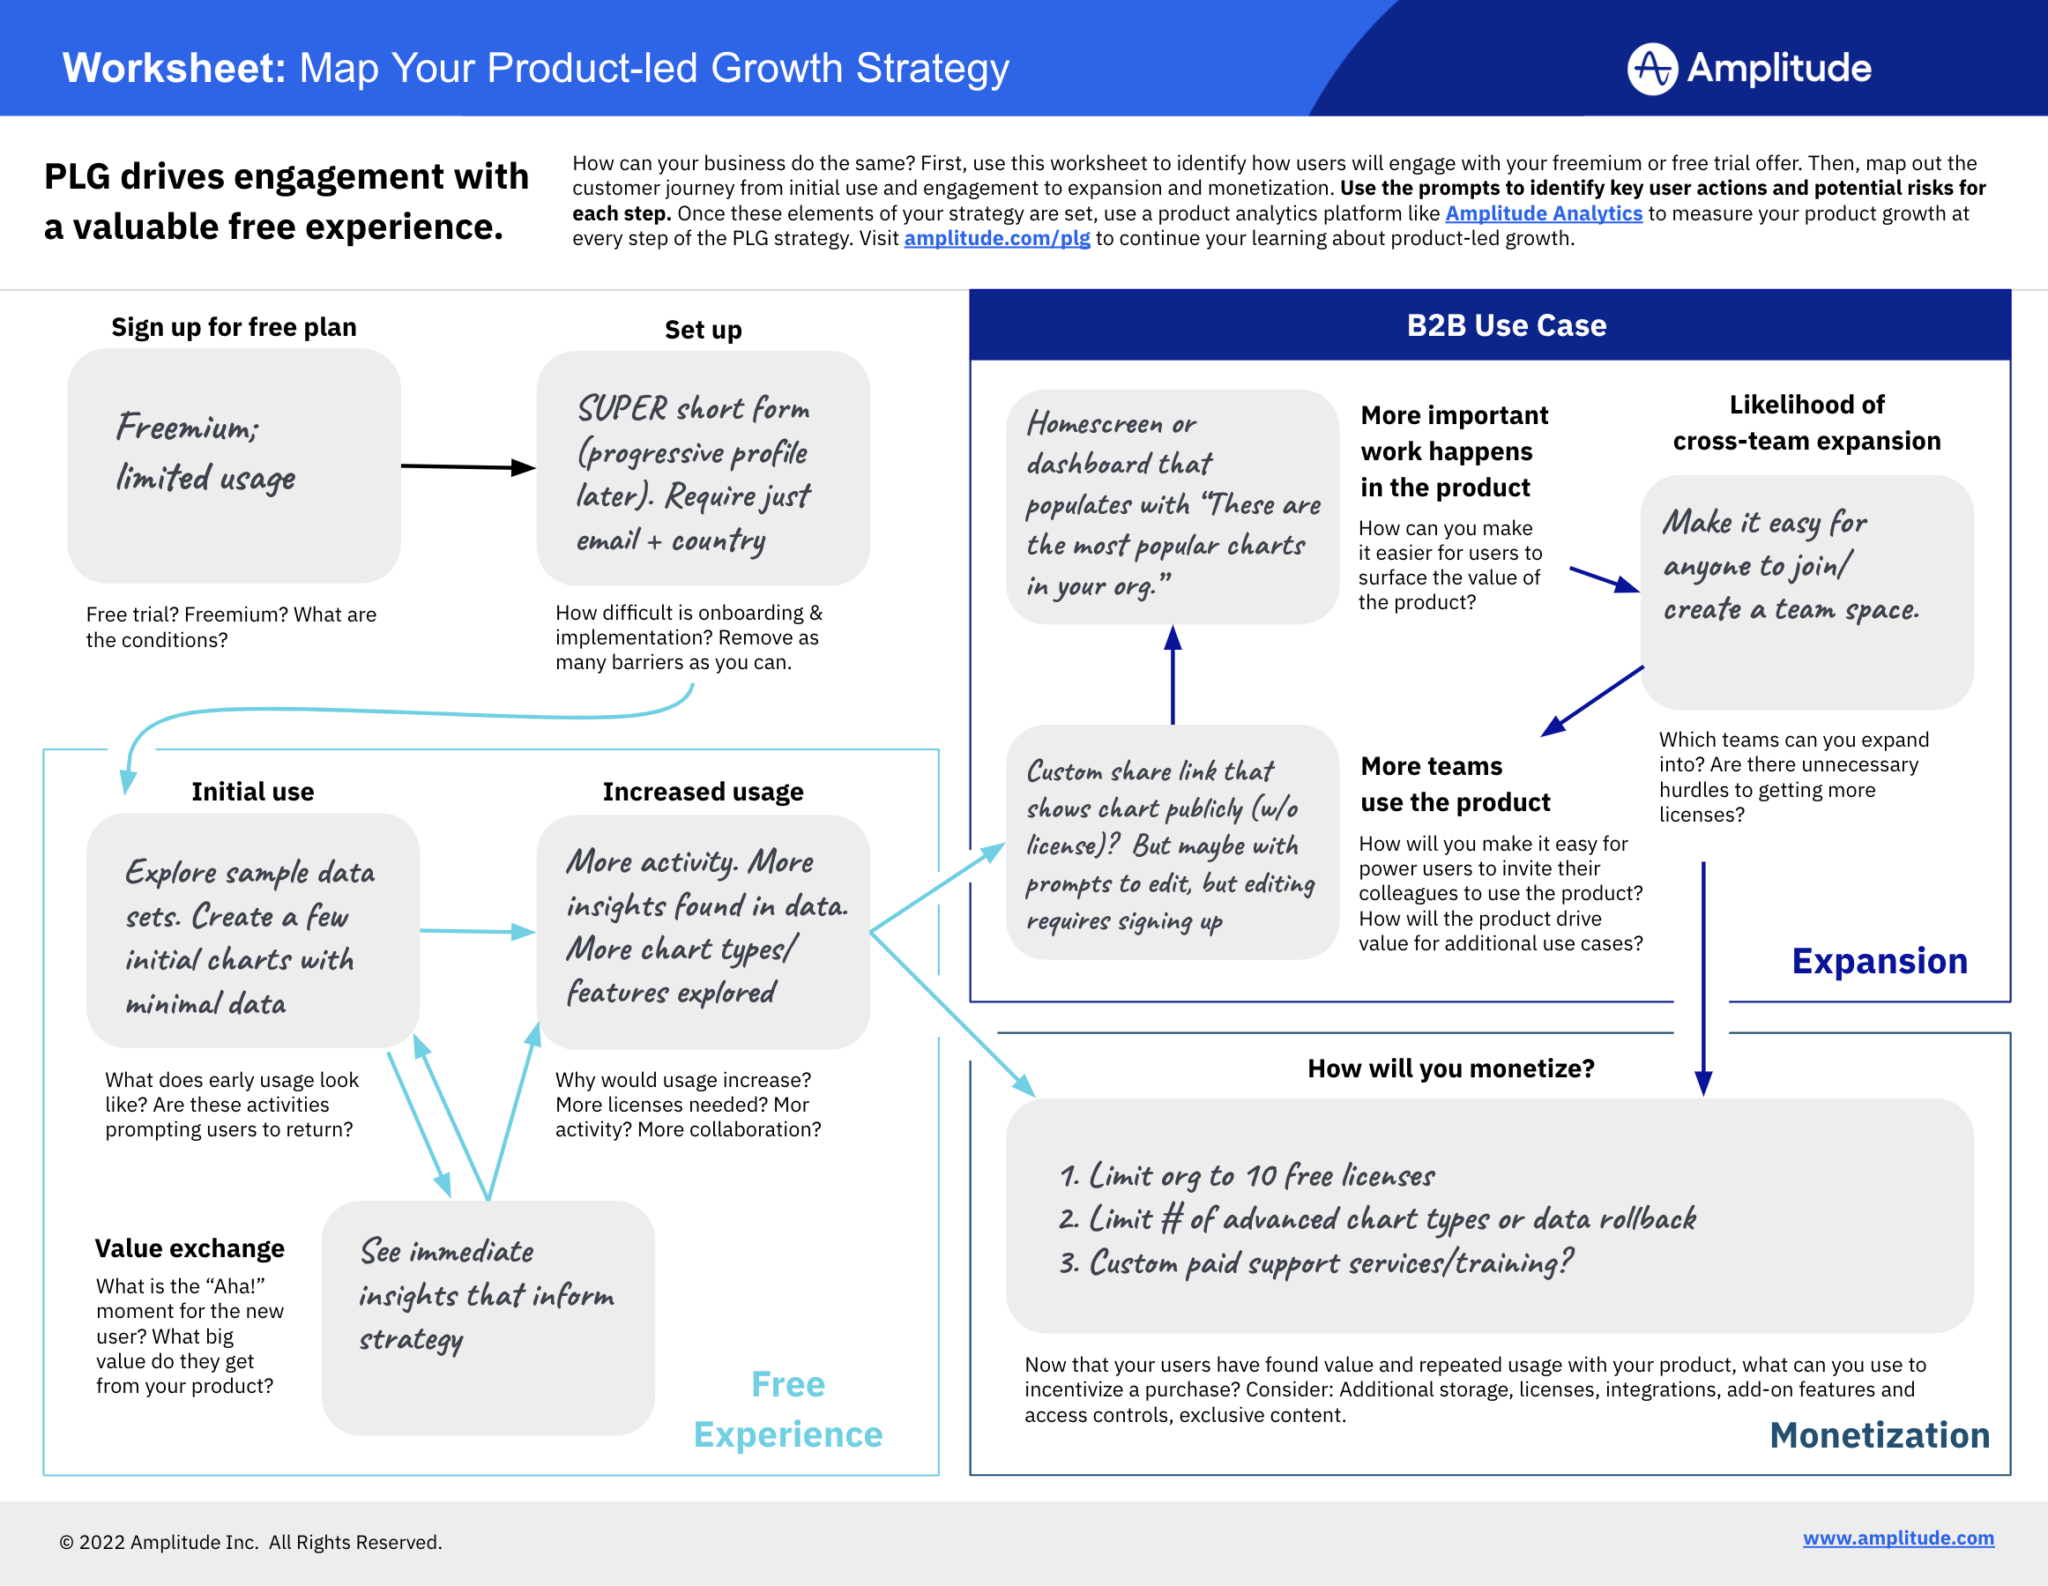 Worksheet example: Map your product-led growth (PLG) strategy